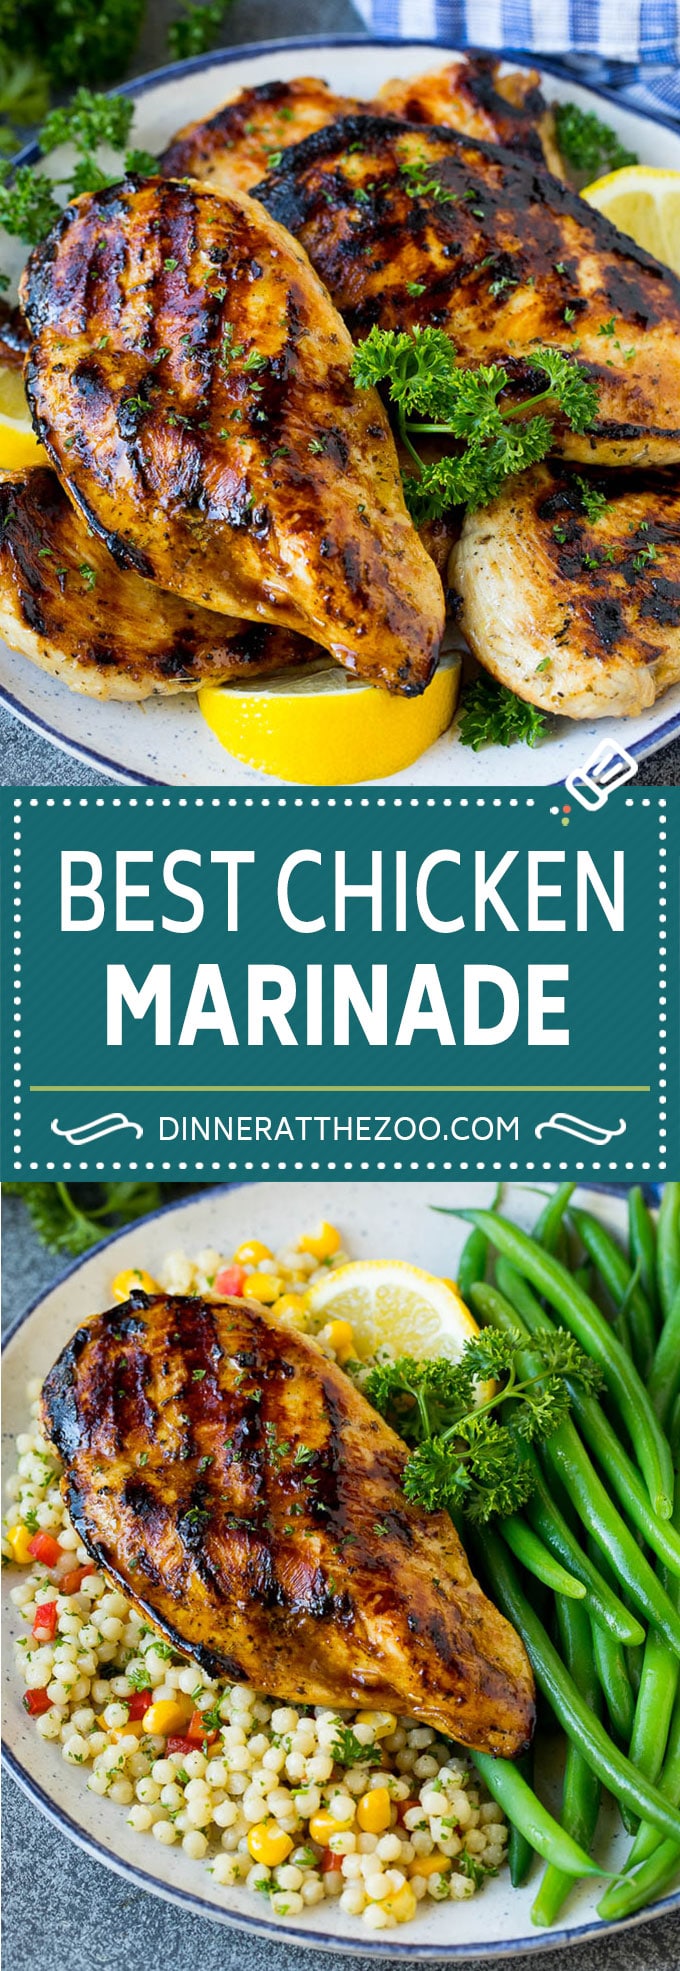 The best chicken marinade produces tender and juicy results every time!